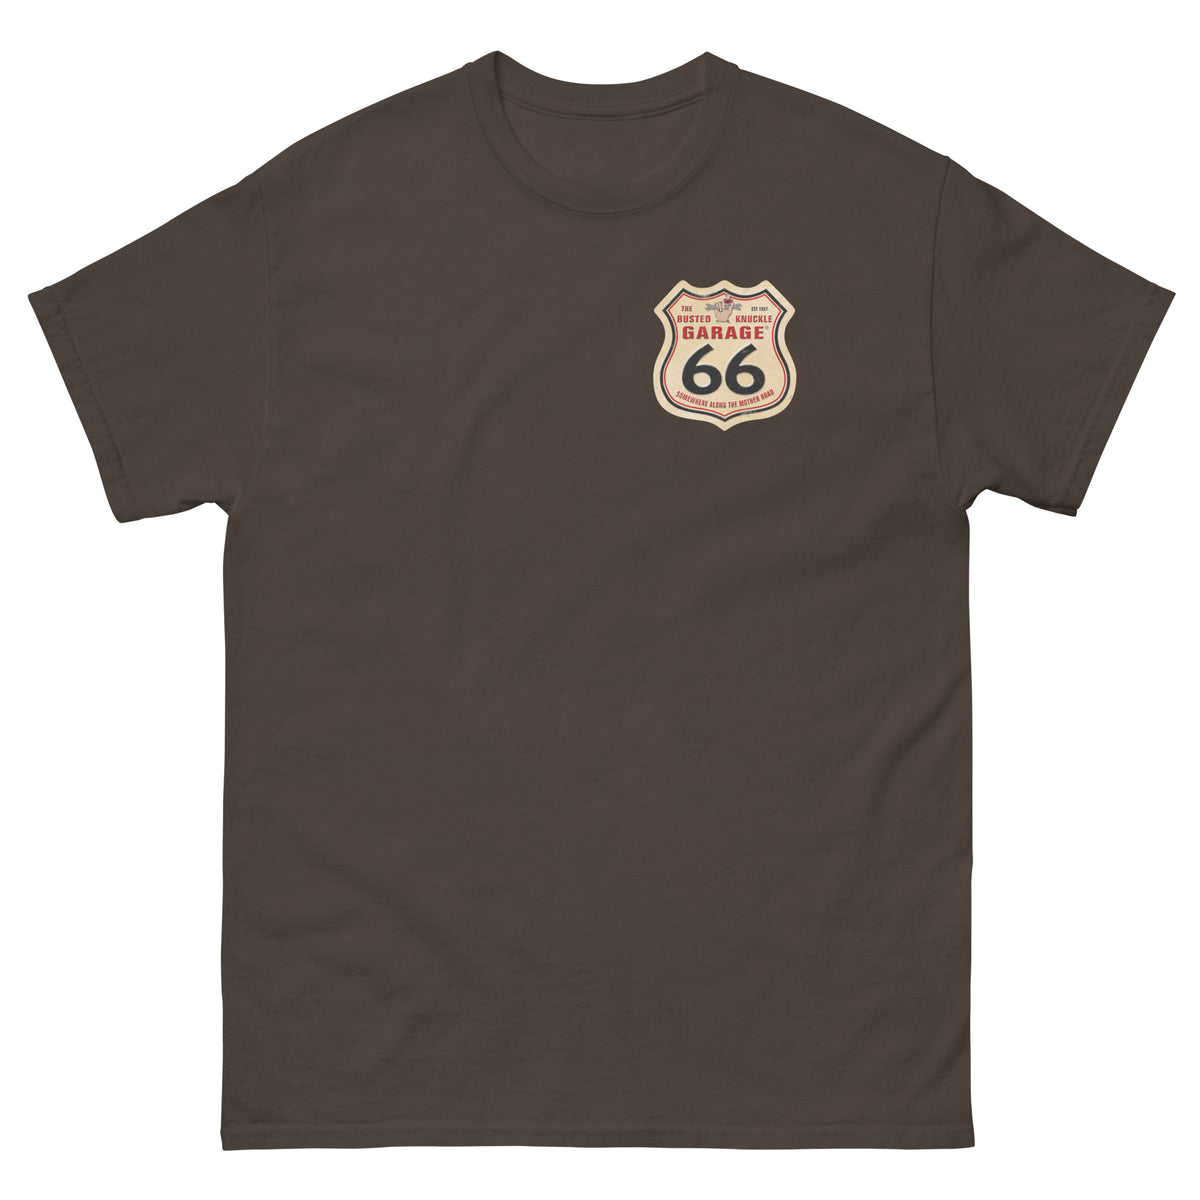 Busted Knuckle Garage Carguy Route 66 Two-Sided Heavyweight Car Guy T-Shirt